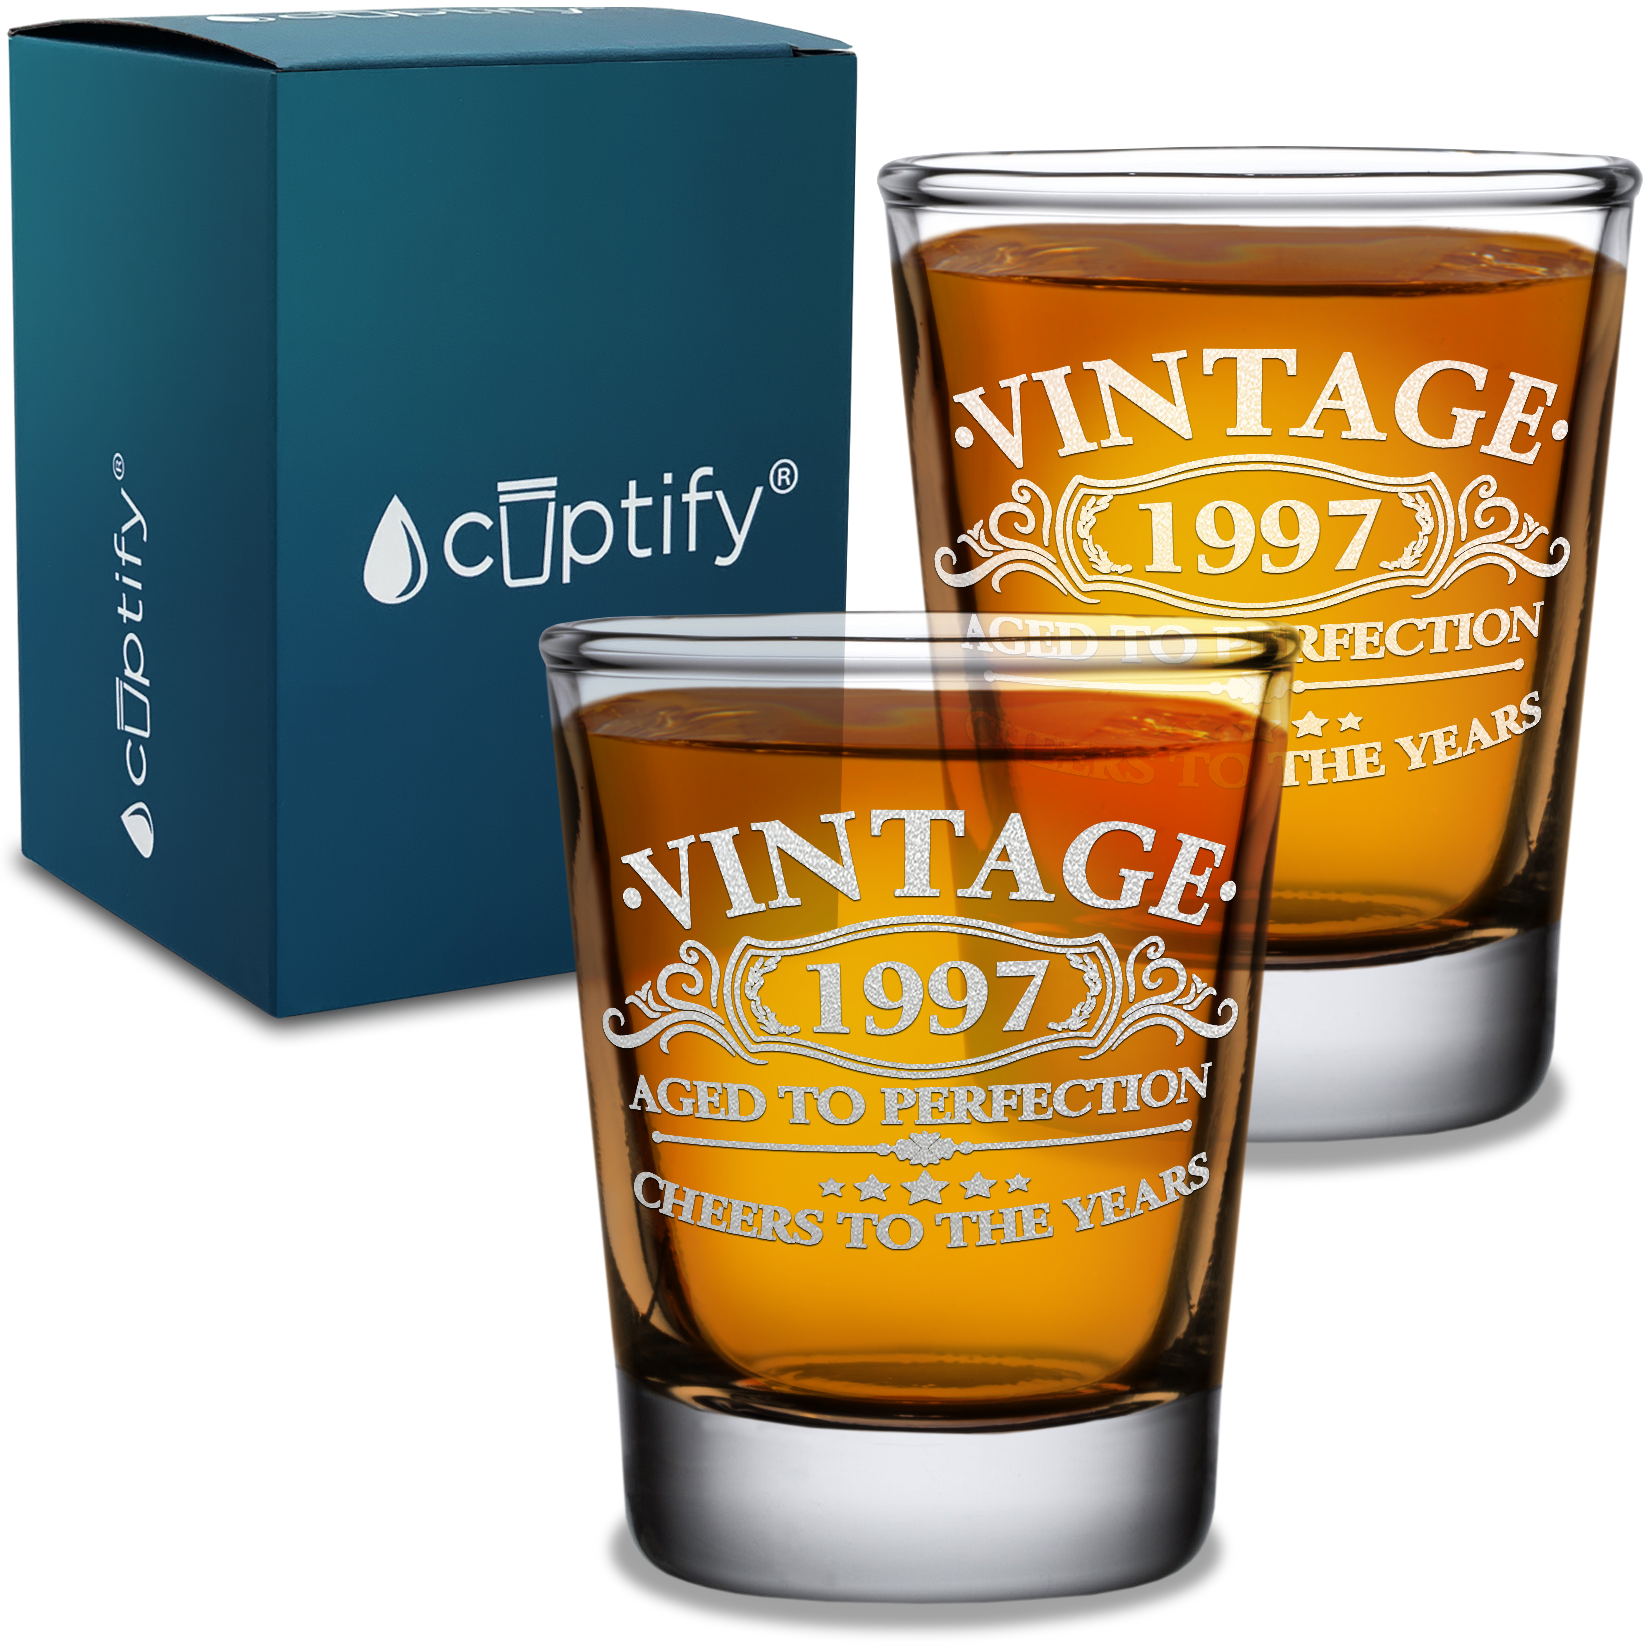 24th Birthday Gift Vintage Aged To Perfection Cheers To 24 Years 1997 Laser Engraved on 2oz Shot Glasses - Set of 2